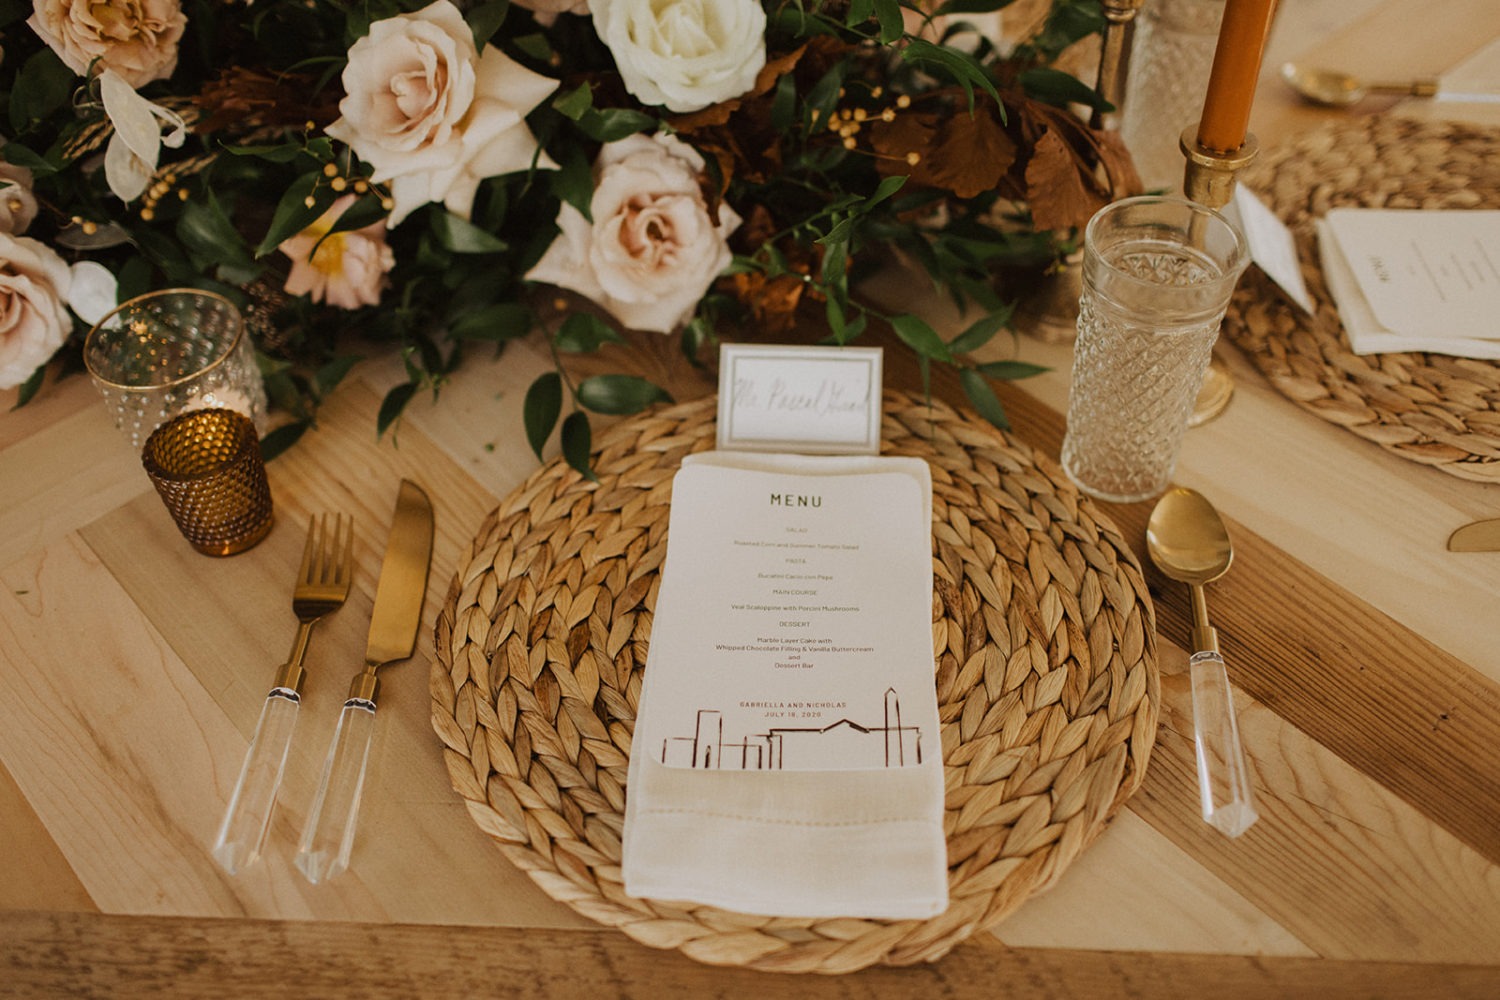 Menu and gold cutlery decorate tables at backyard wedding reception